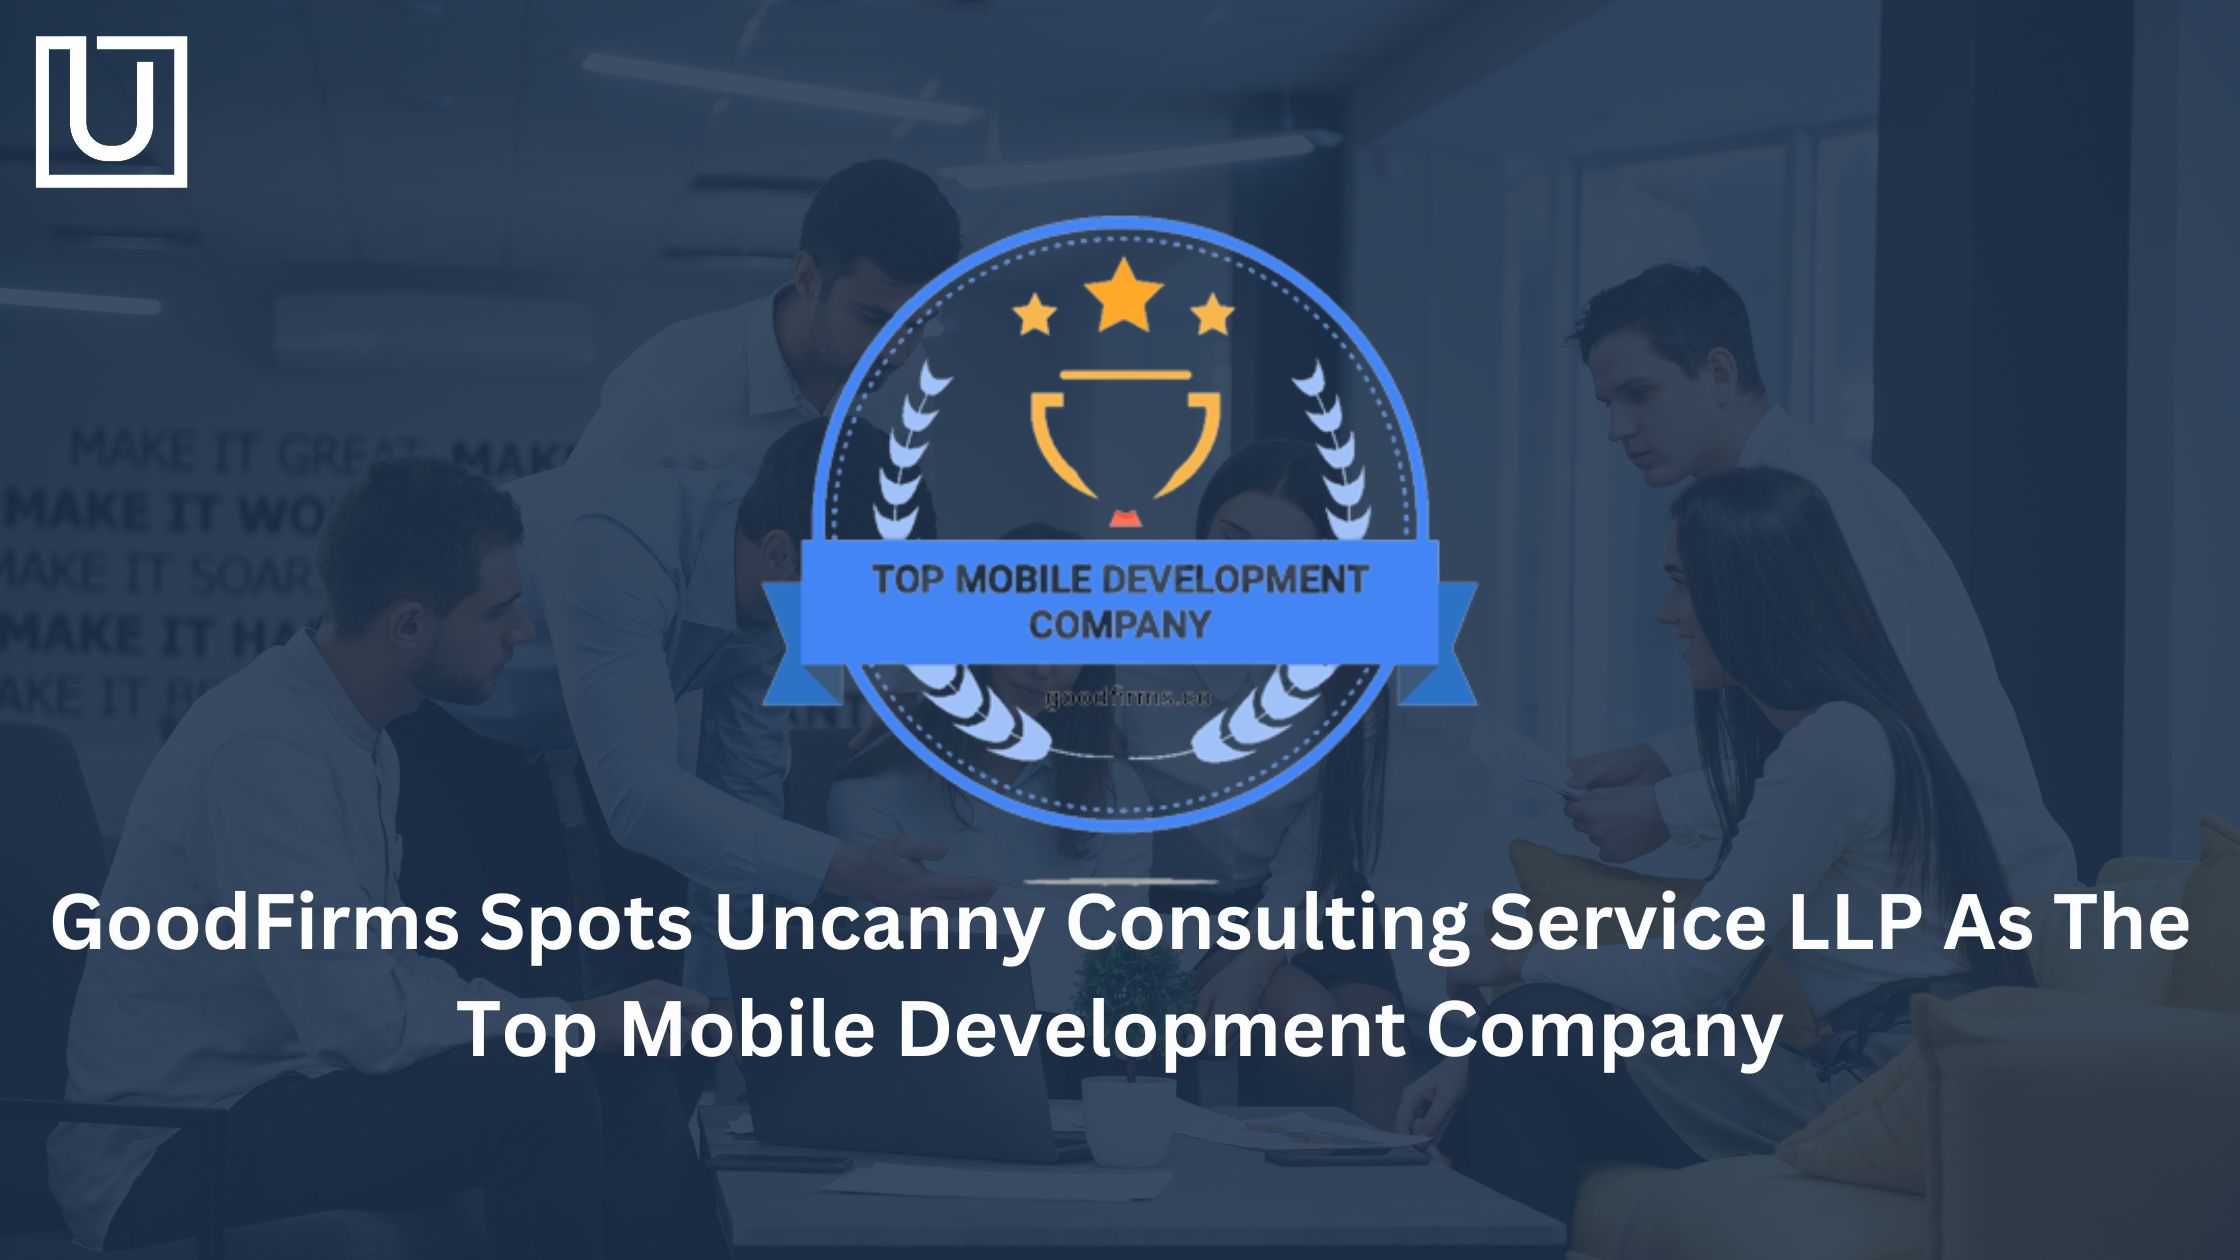 GoodFirms Spots Uncanny Consulting Service LLP As The Top Mobile Development Company